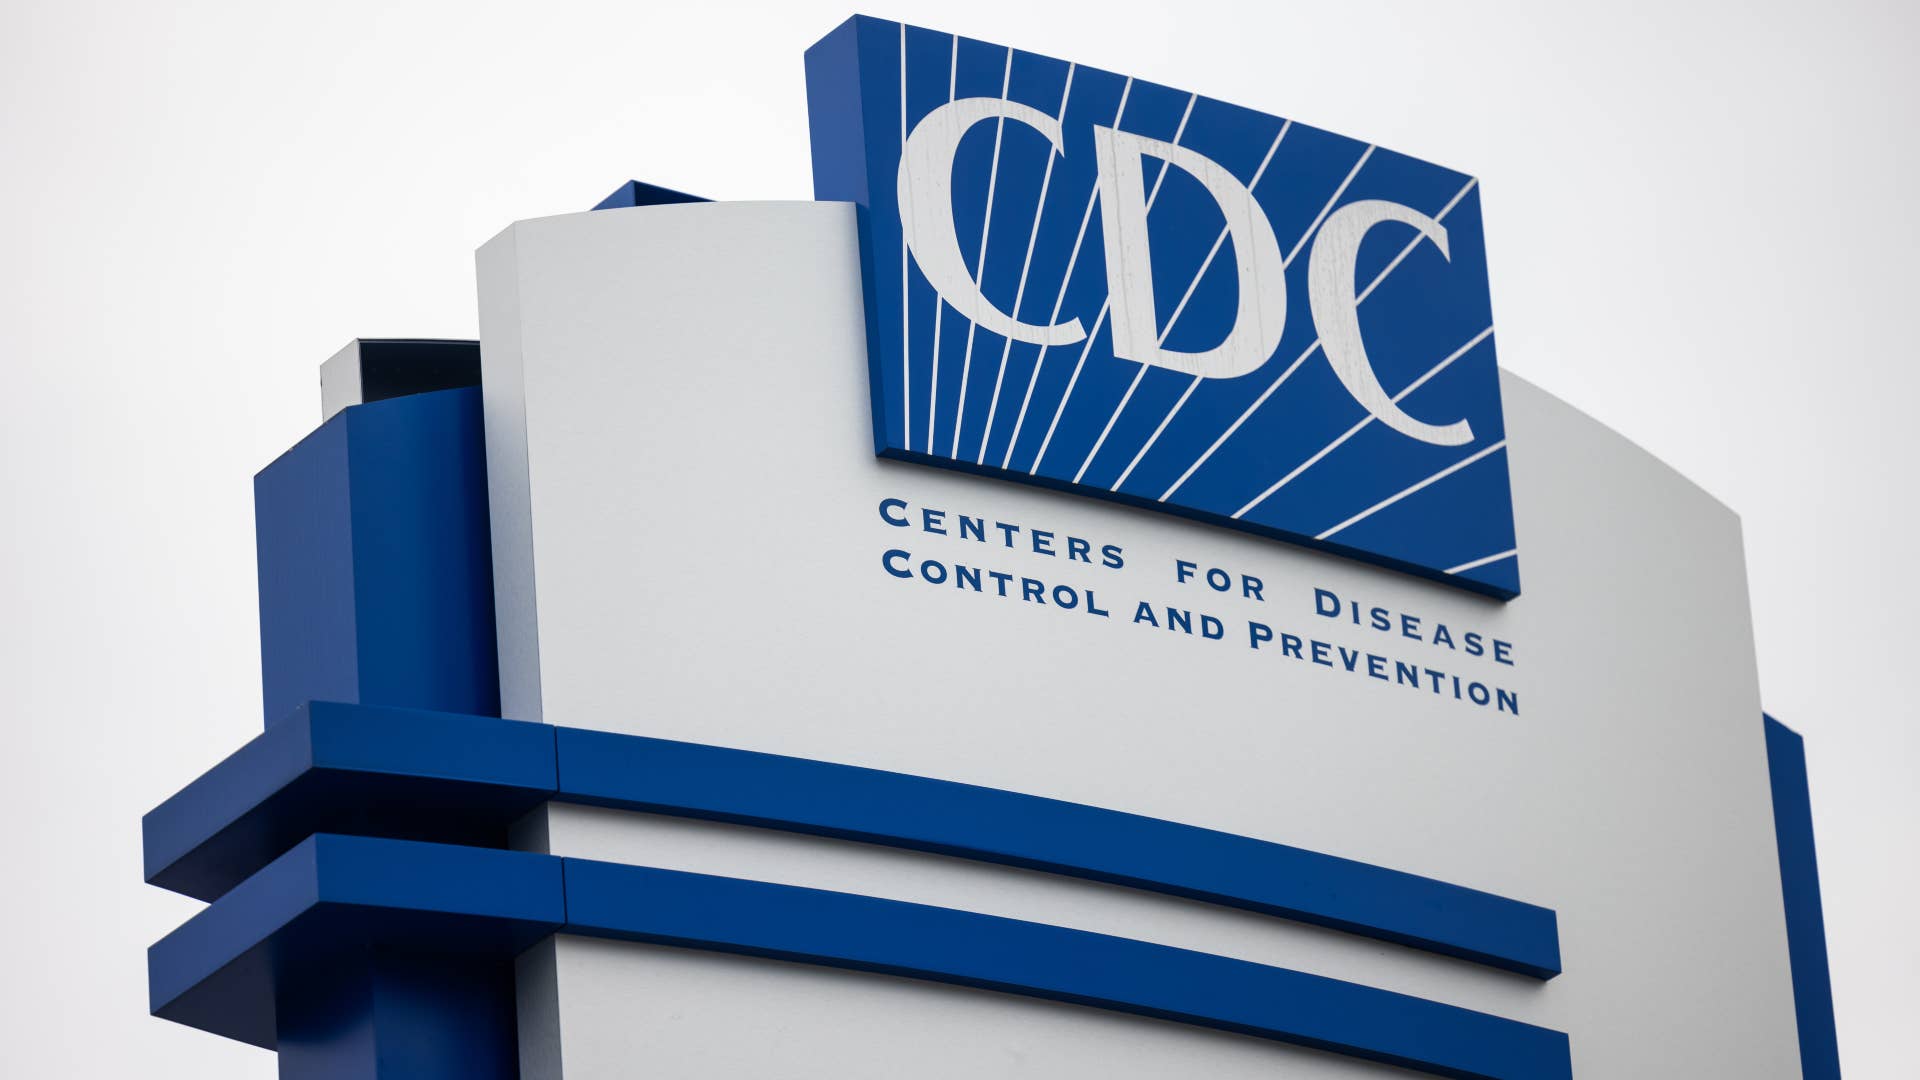 CDC outside building logo is pictured